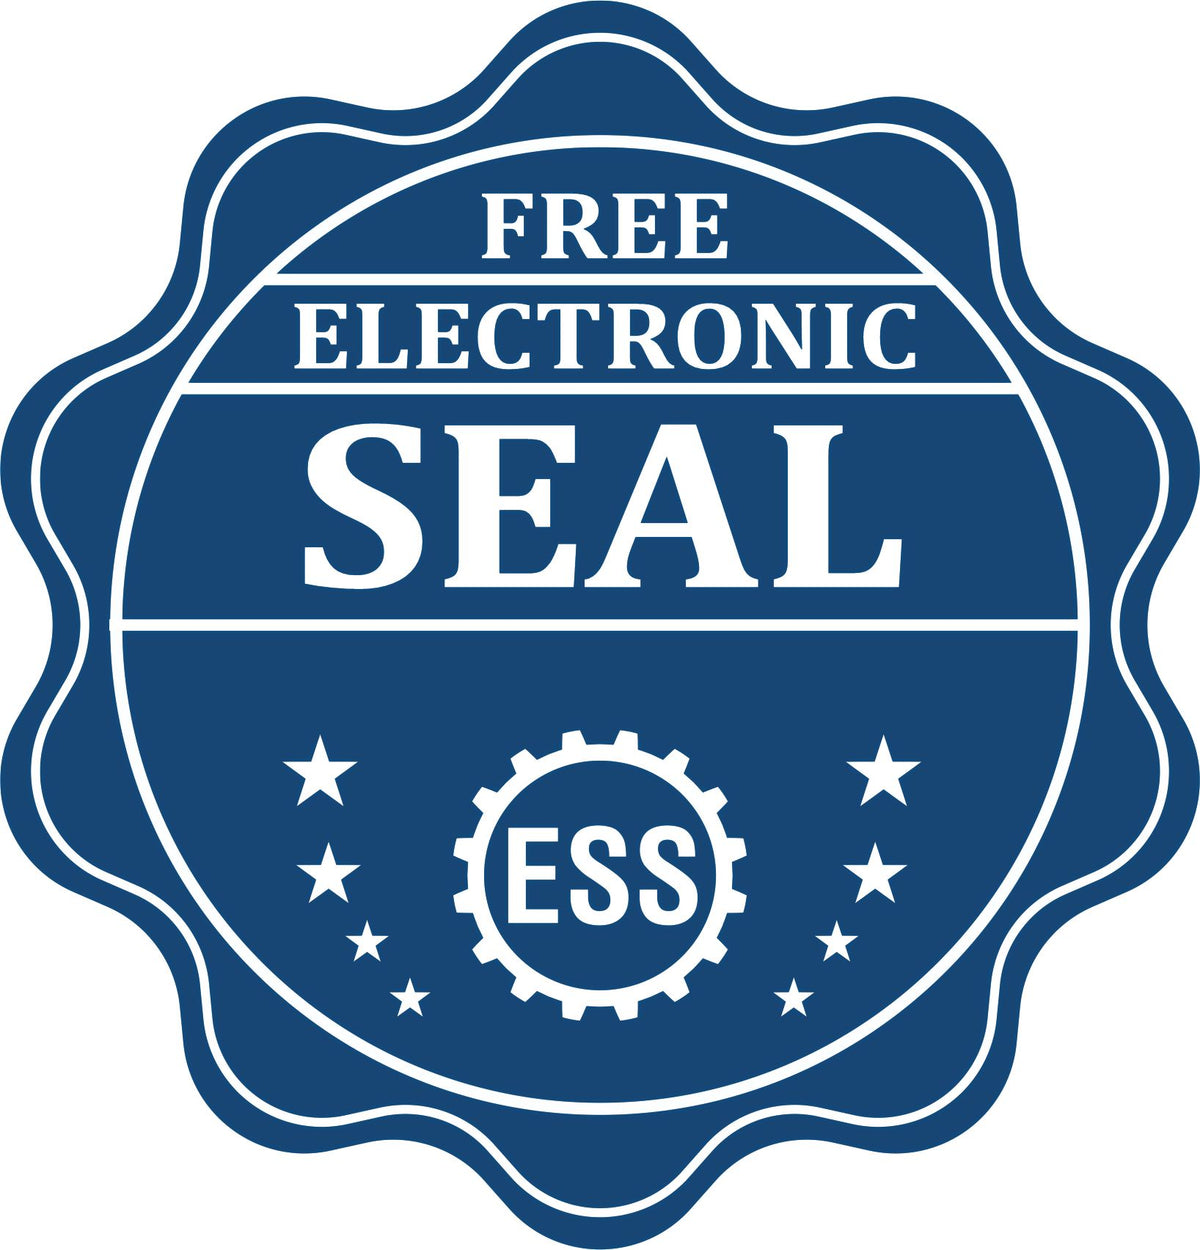 A badge showing a free electronic seal for the Slim Pre-Inked State Seal Notary Stamp for Vermont with stars and the ESS gear on the emblem.